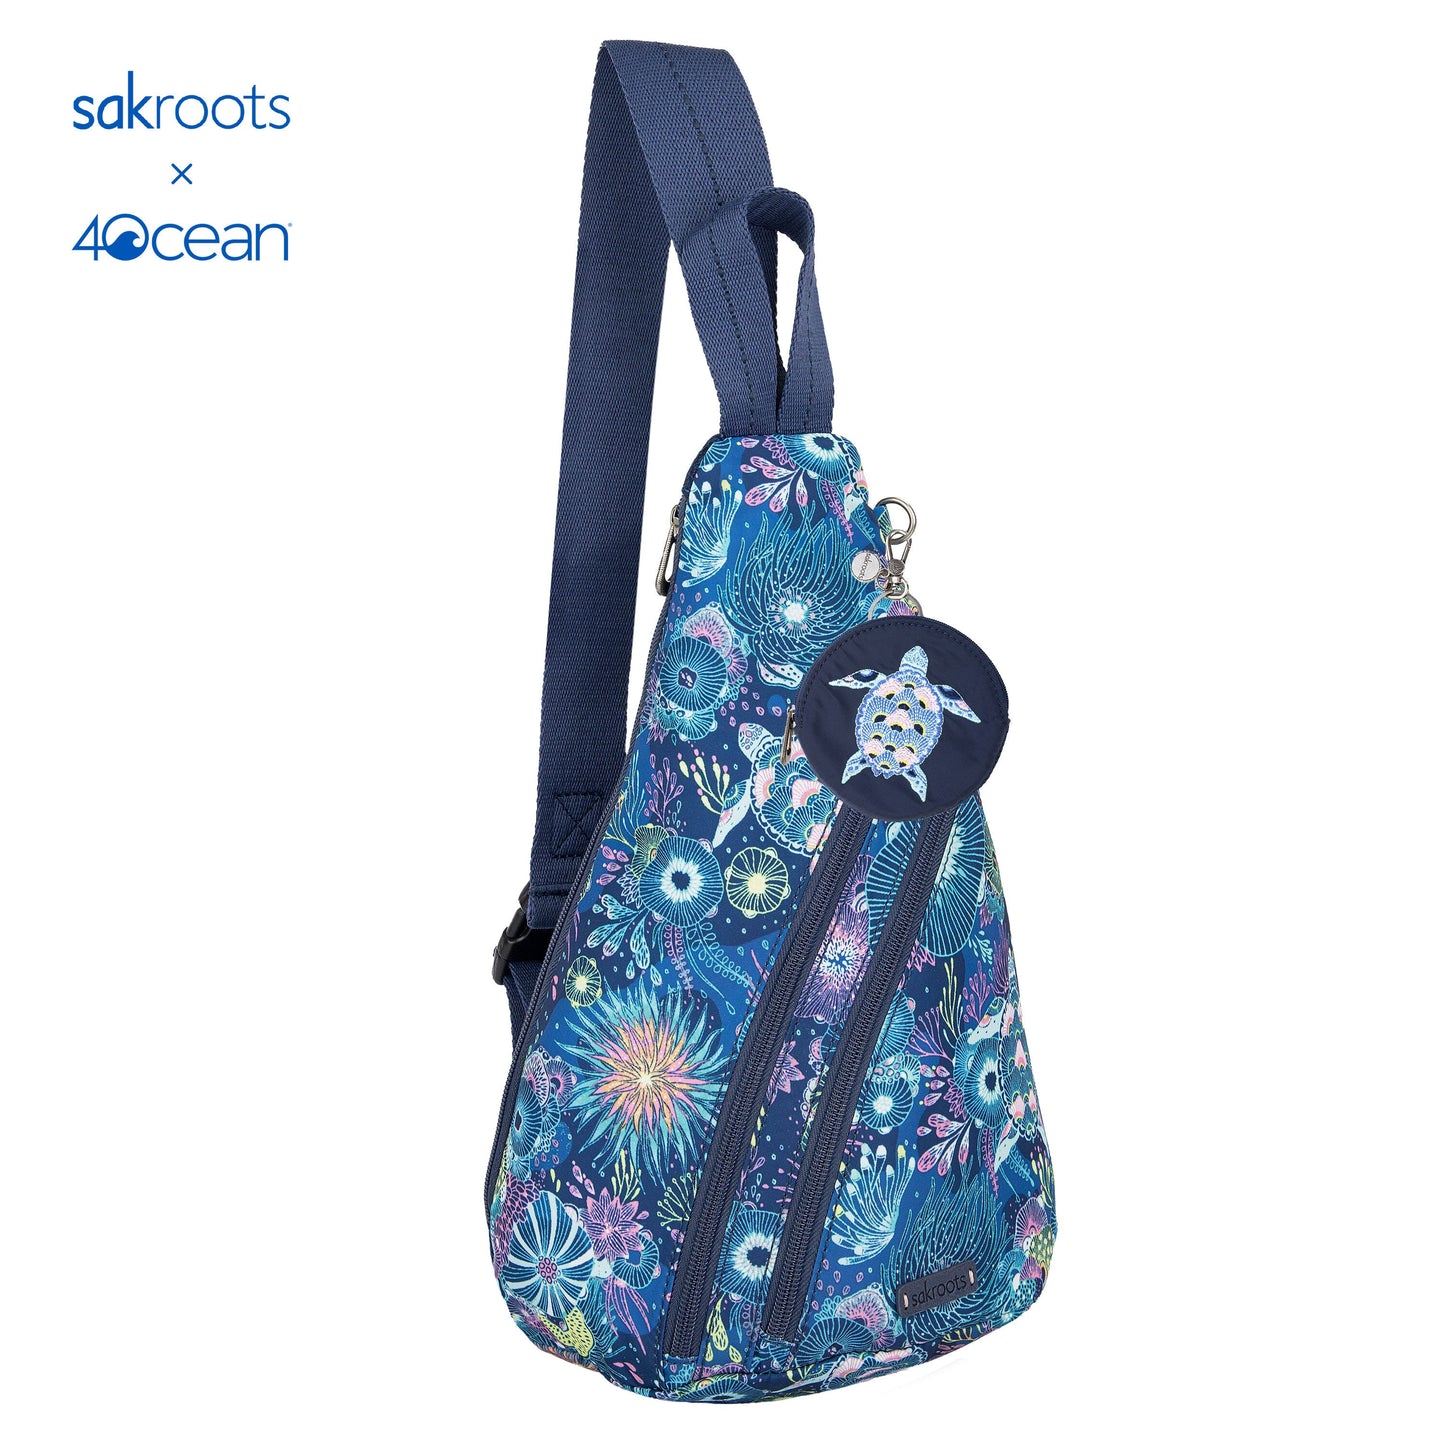 Sakroots x 4ocean On-the-Go Sling Backpack with Coin Purse